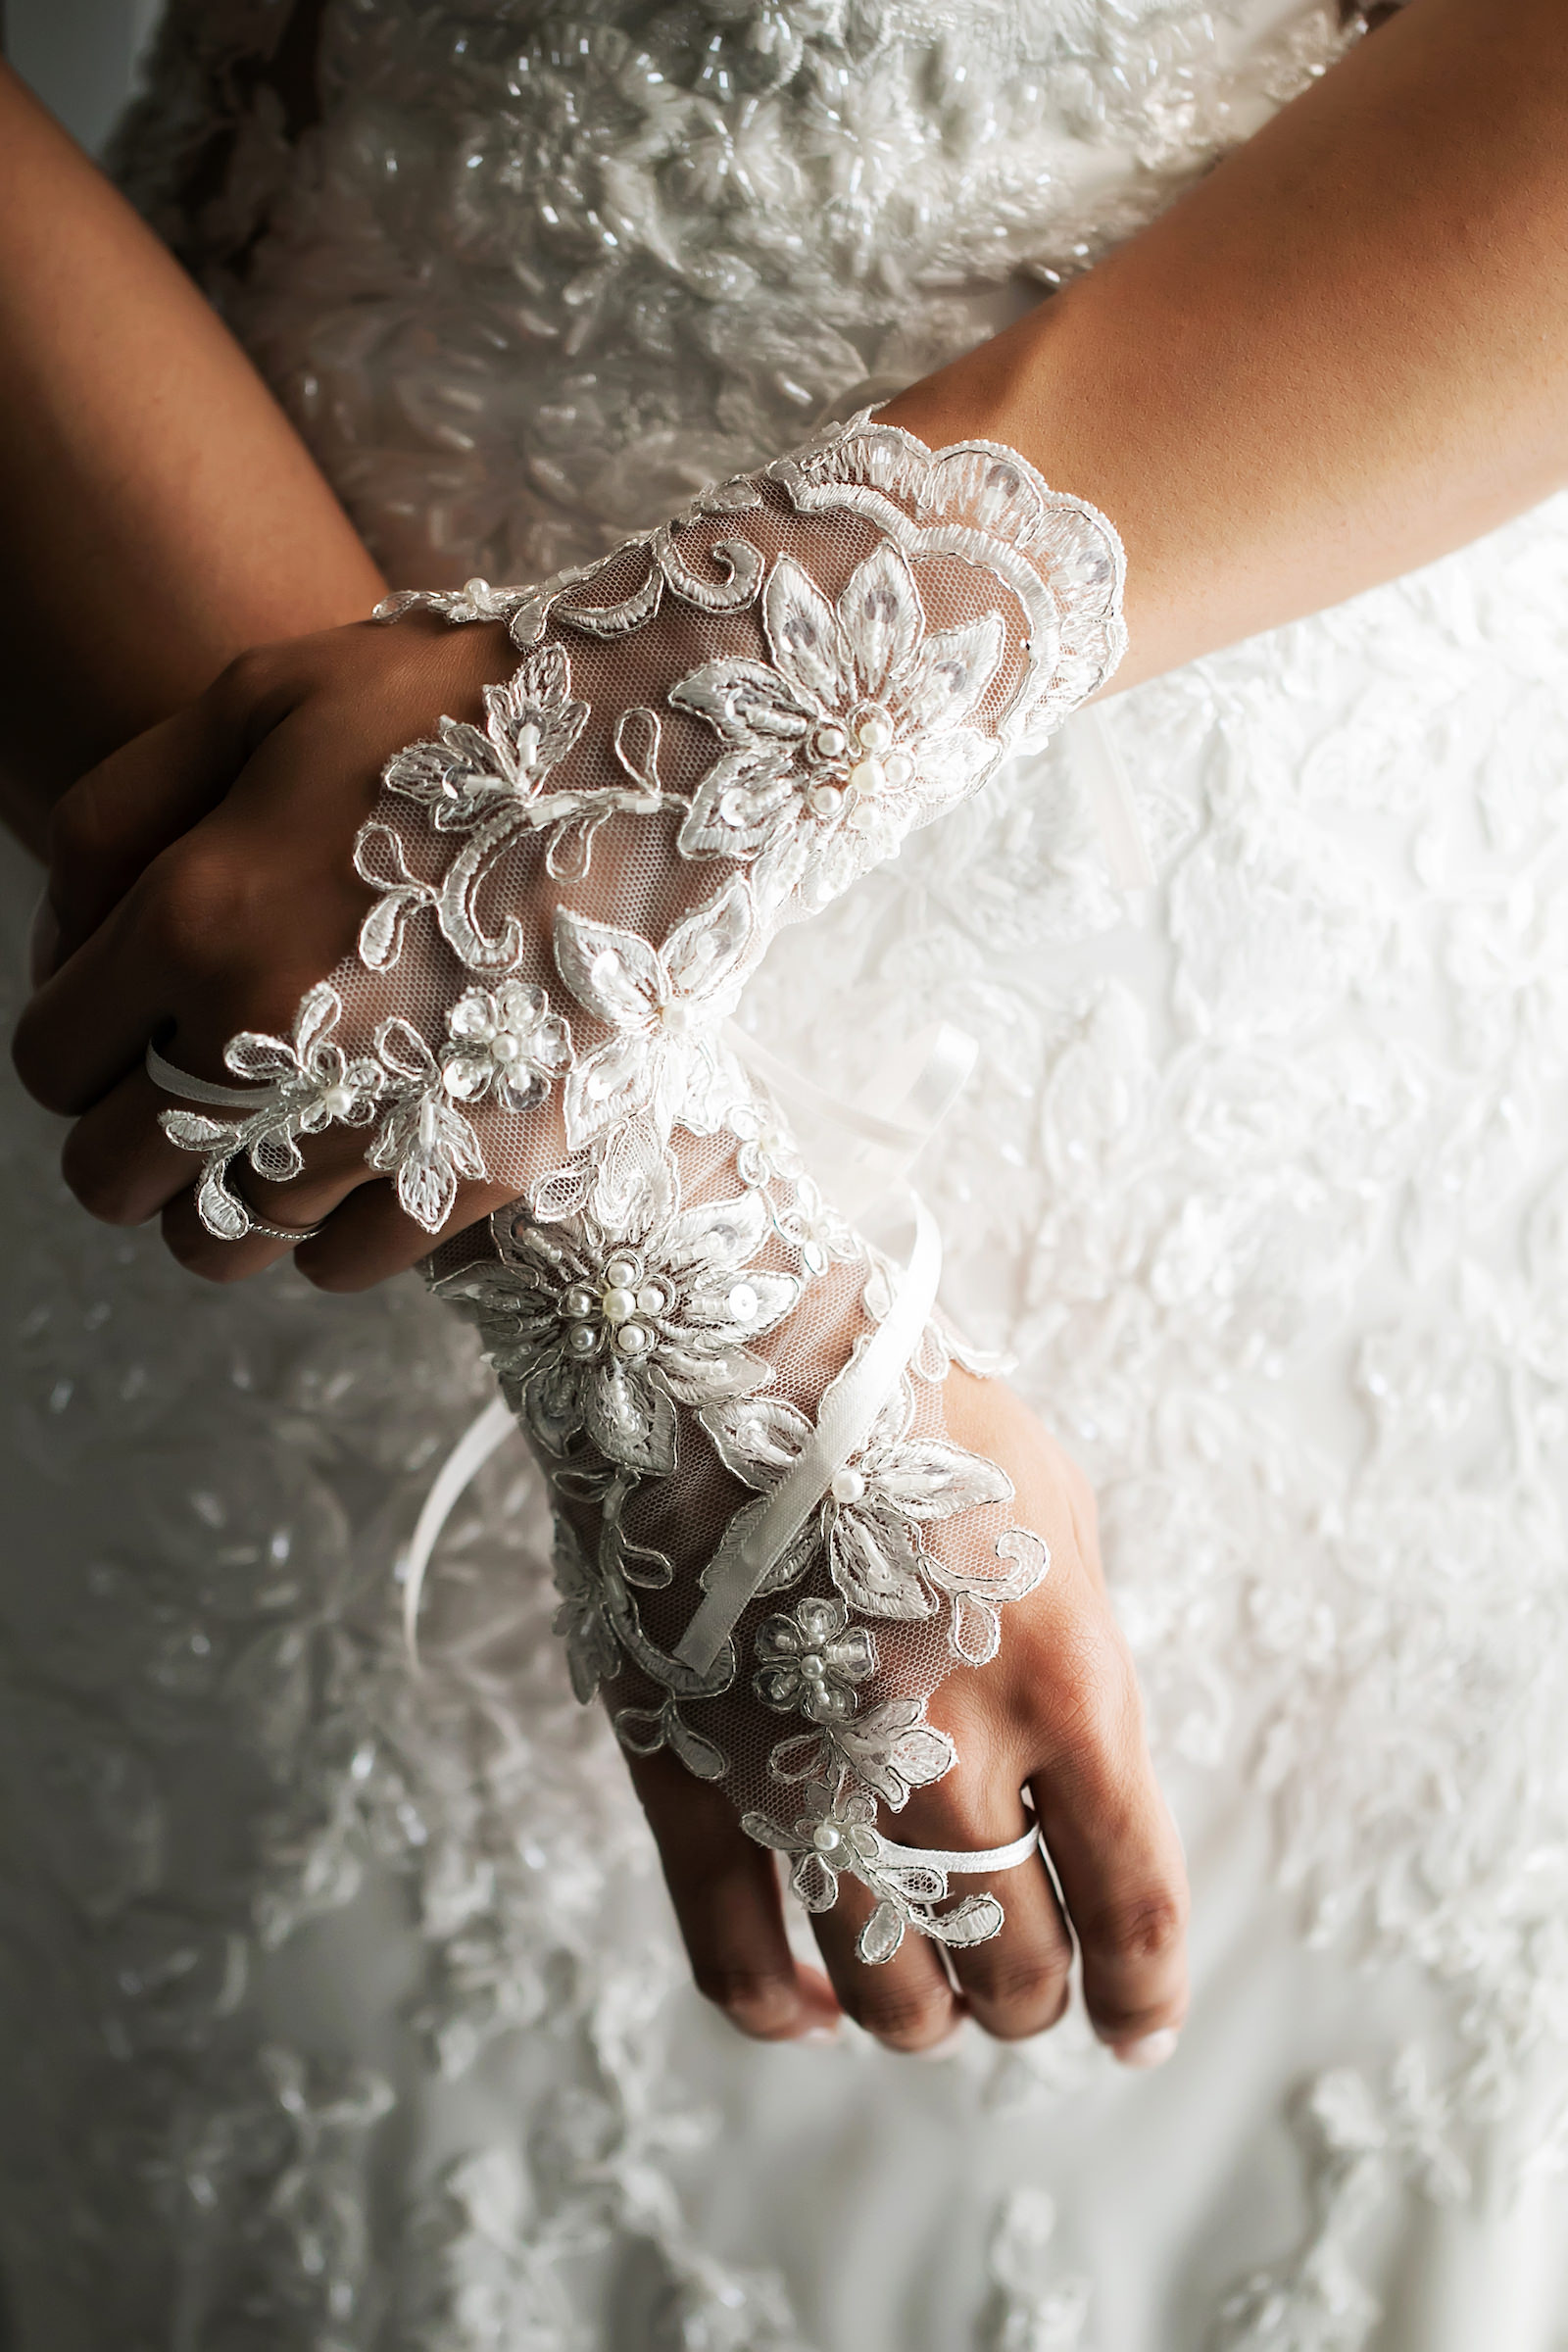 Elegant Bridal Details, Bride Wearing Lace and Illusion Gloves | Tampa Bay Wedding Photographer Limelight Photography